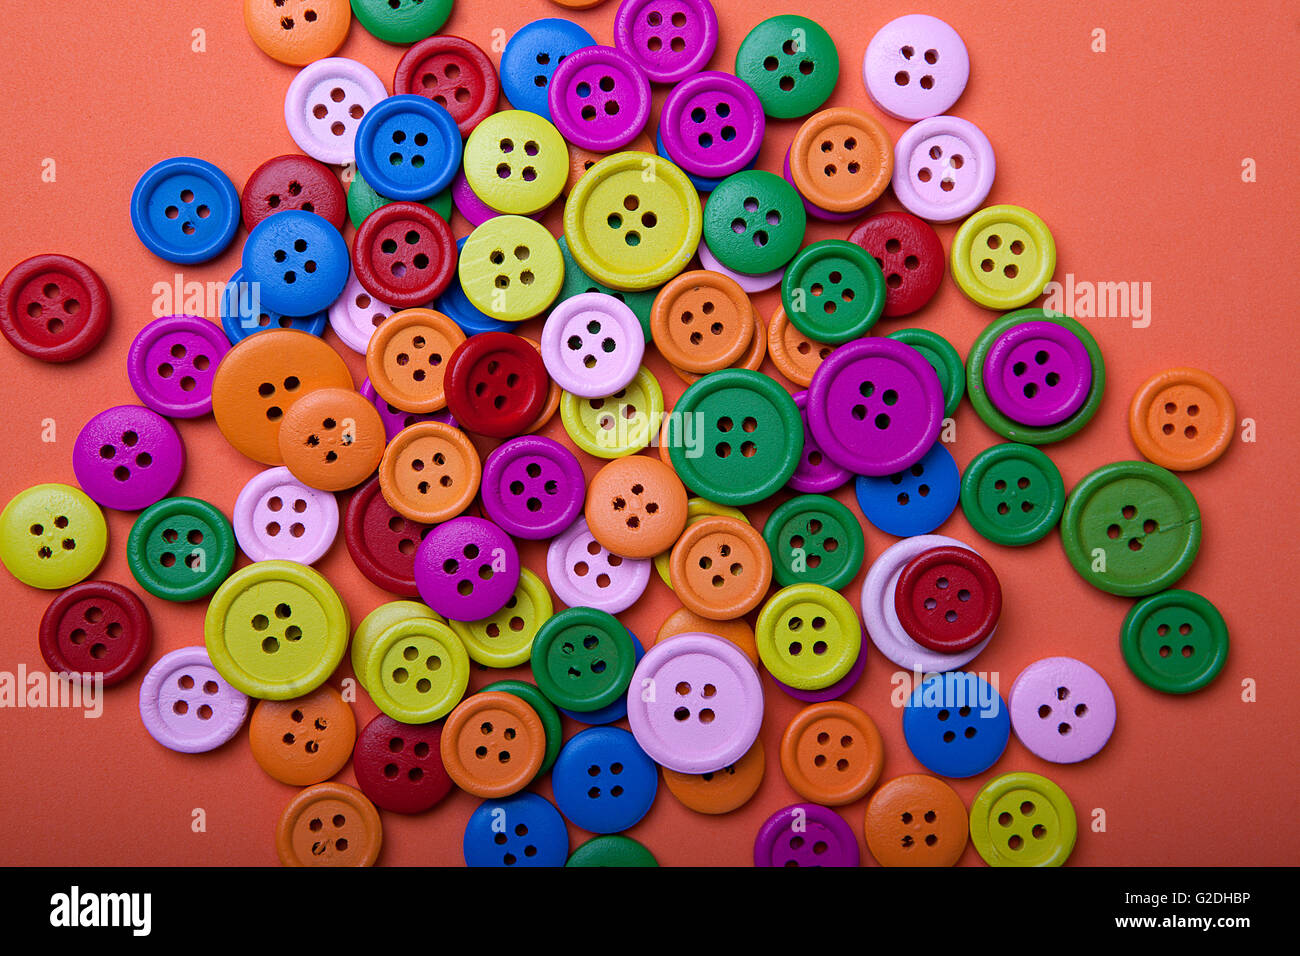 Heap of buttons in many color variations Stock Photo